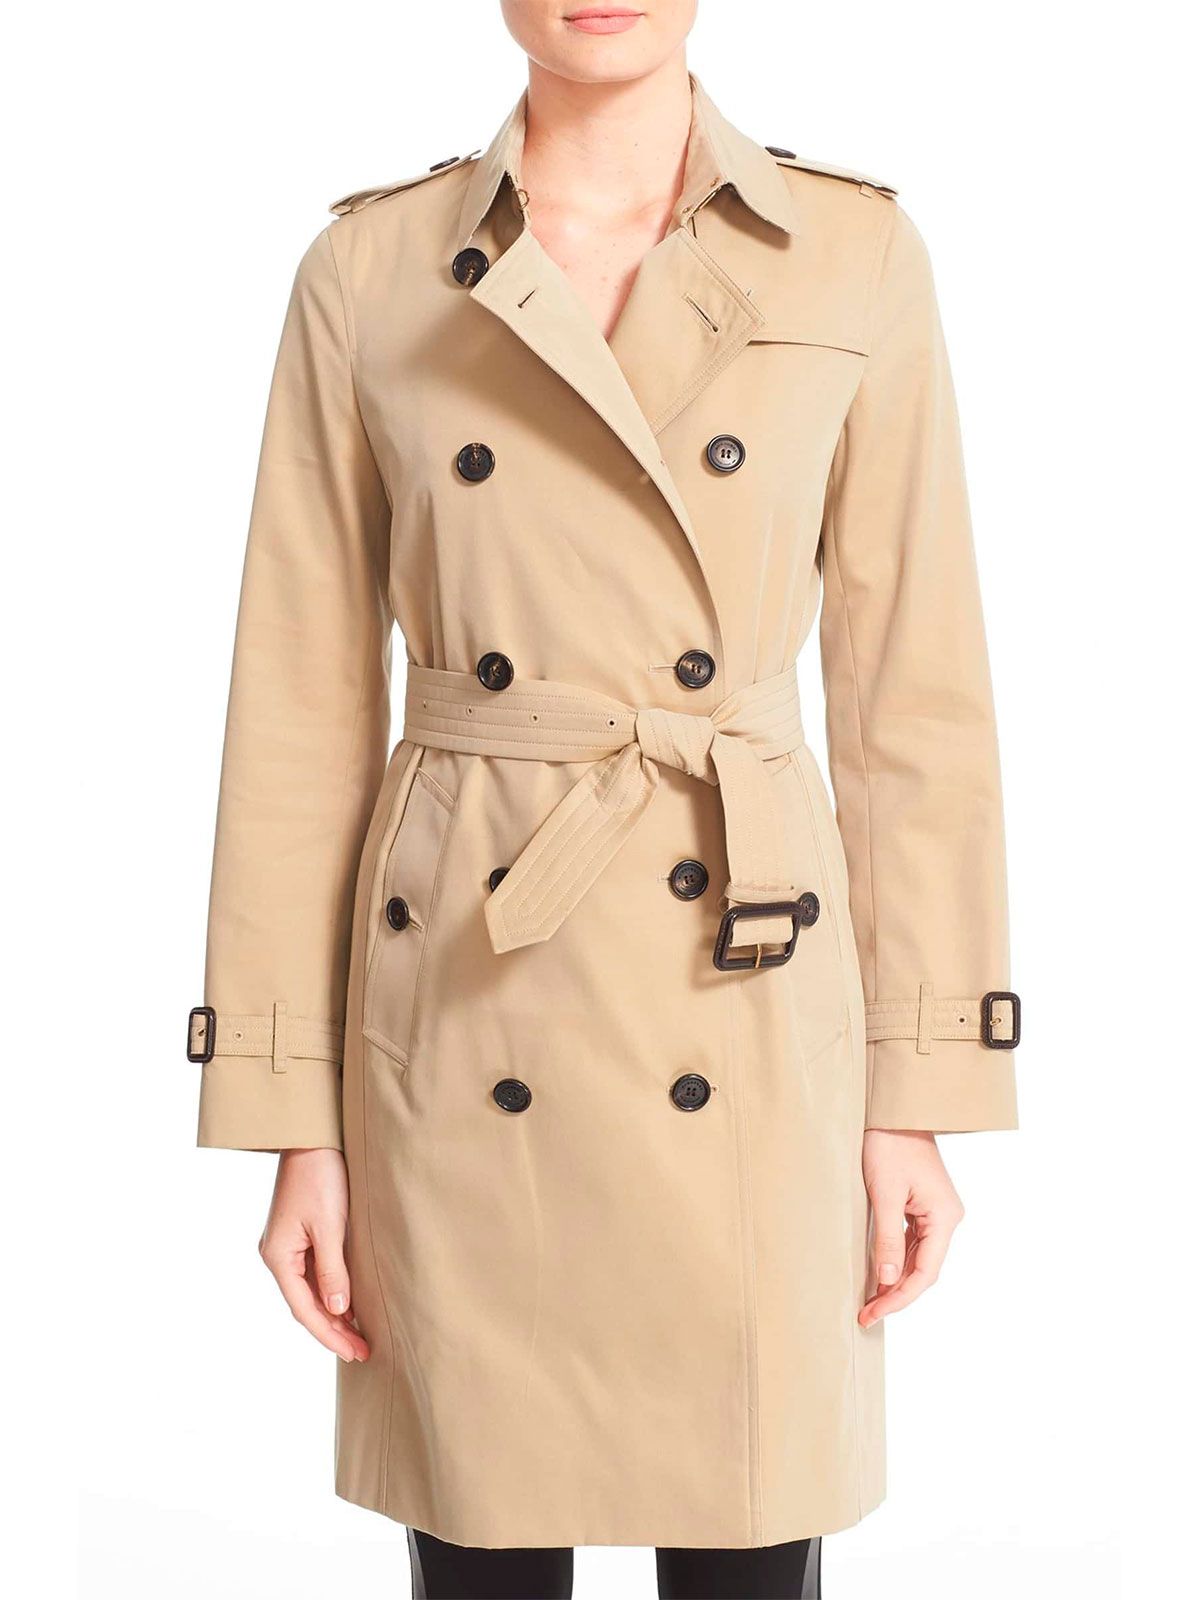 6 Classic, Meghan Markle-Inspired Trench Coats | Real Simple